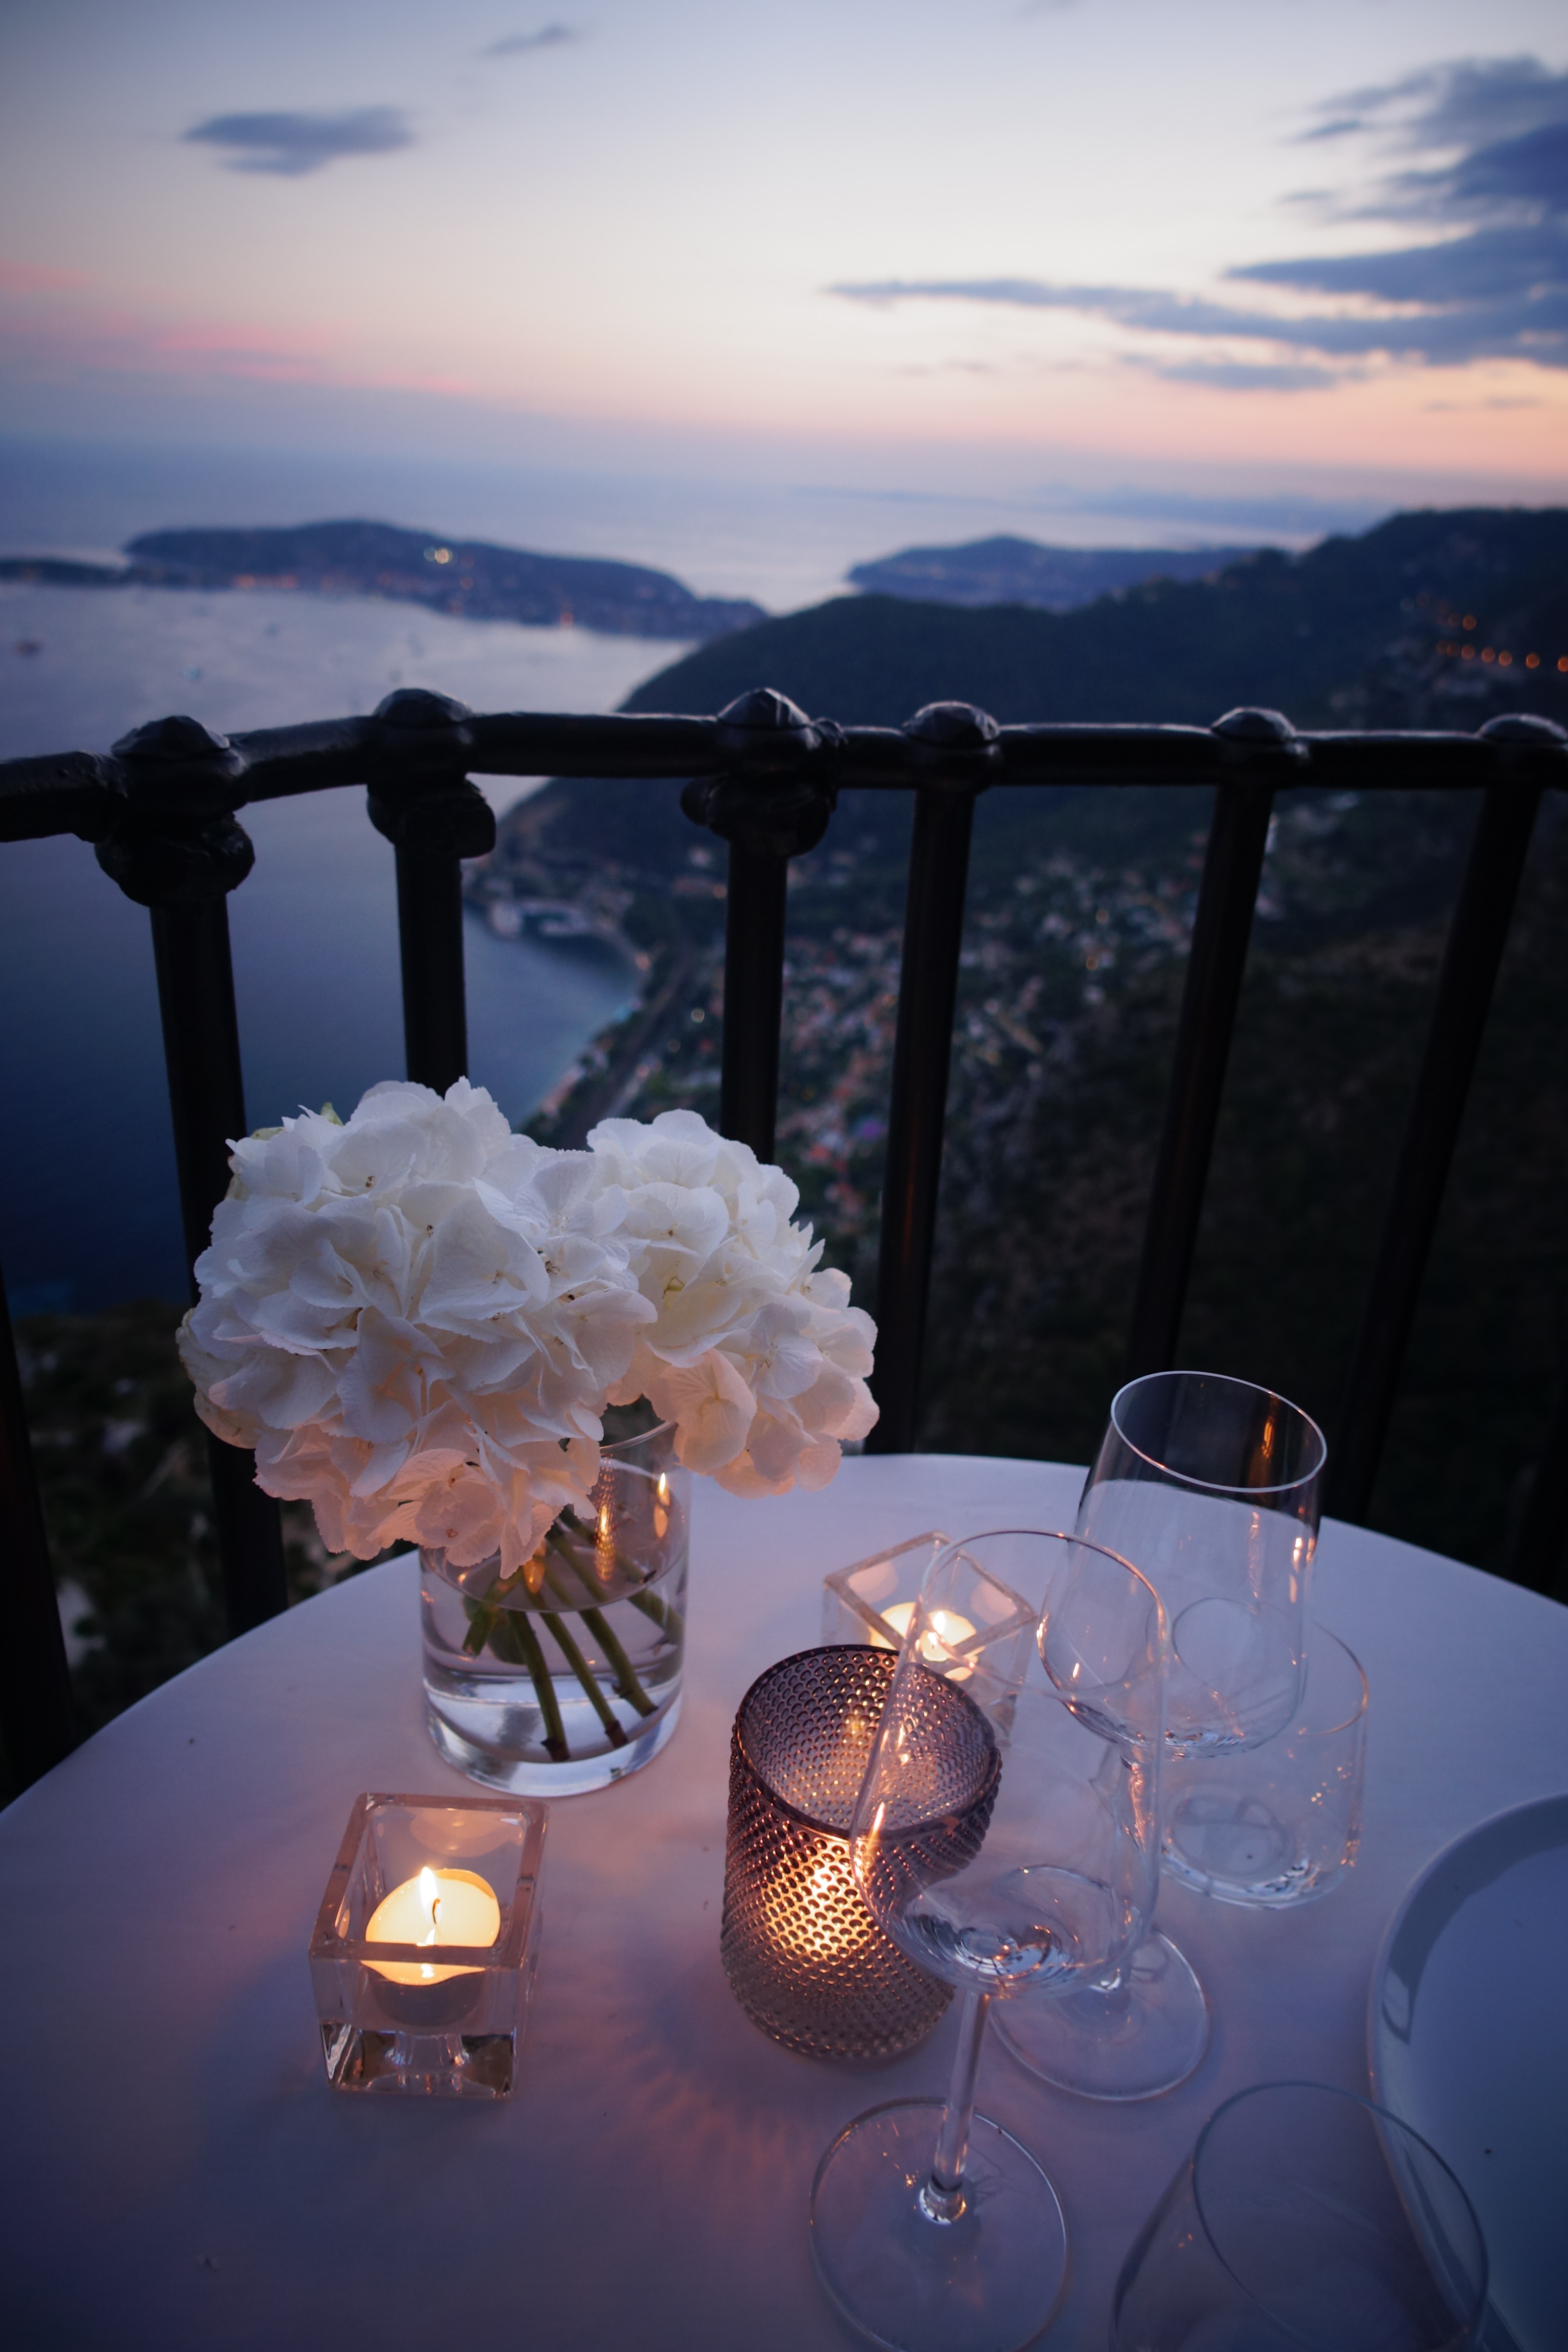 A table overlooking a beautiful view. ┃Source: Unsplash